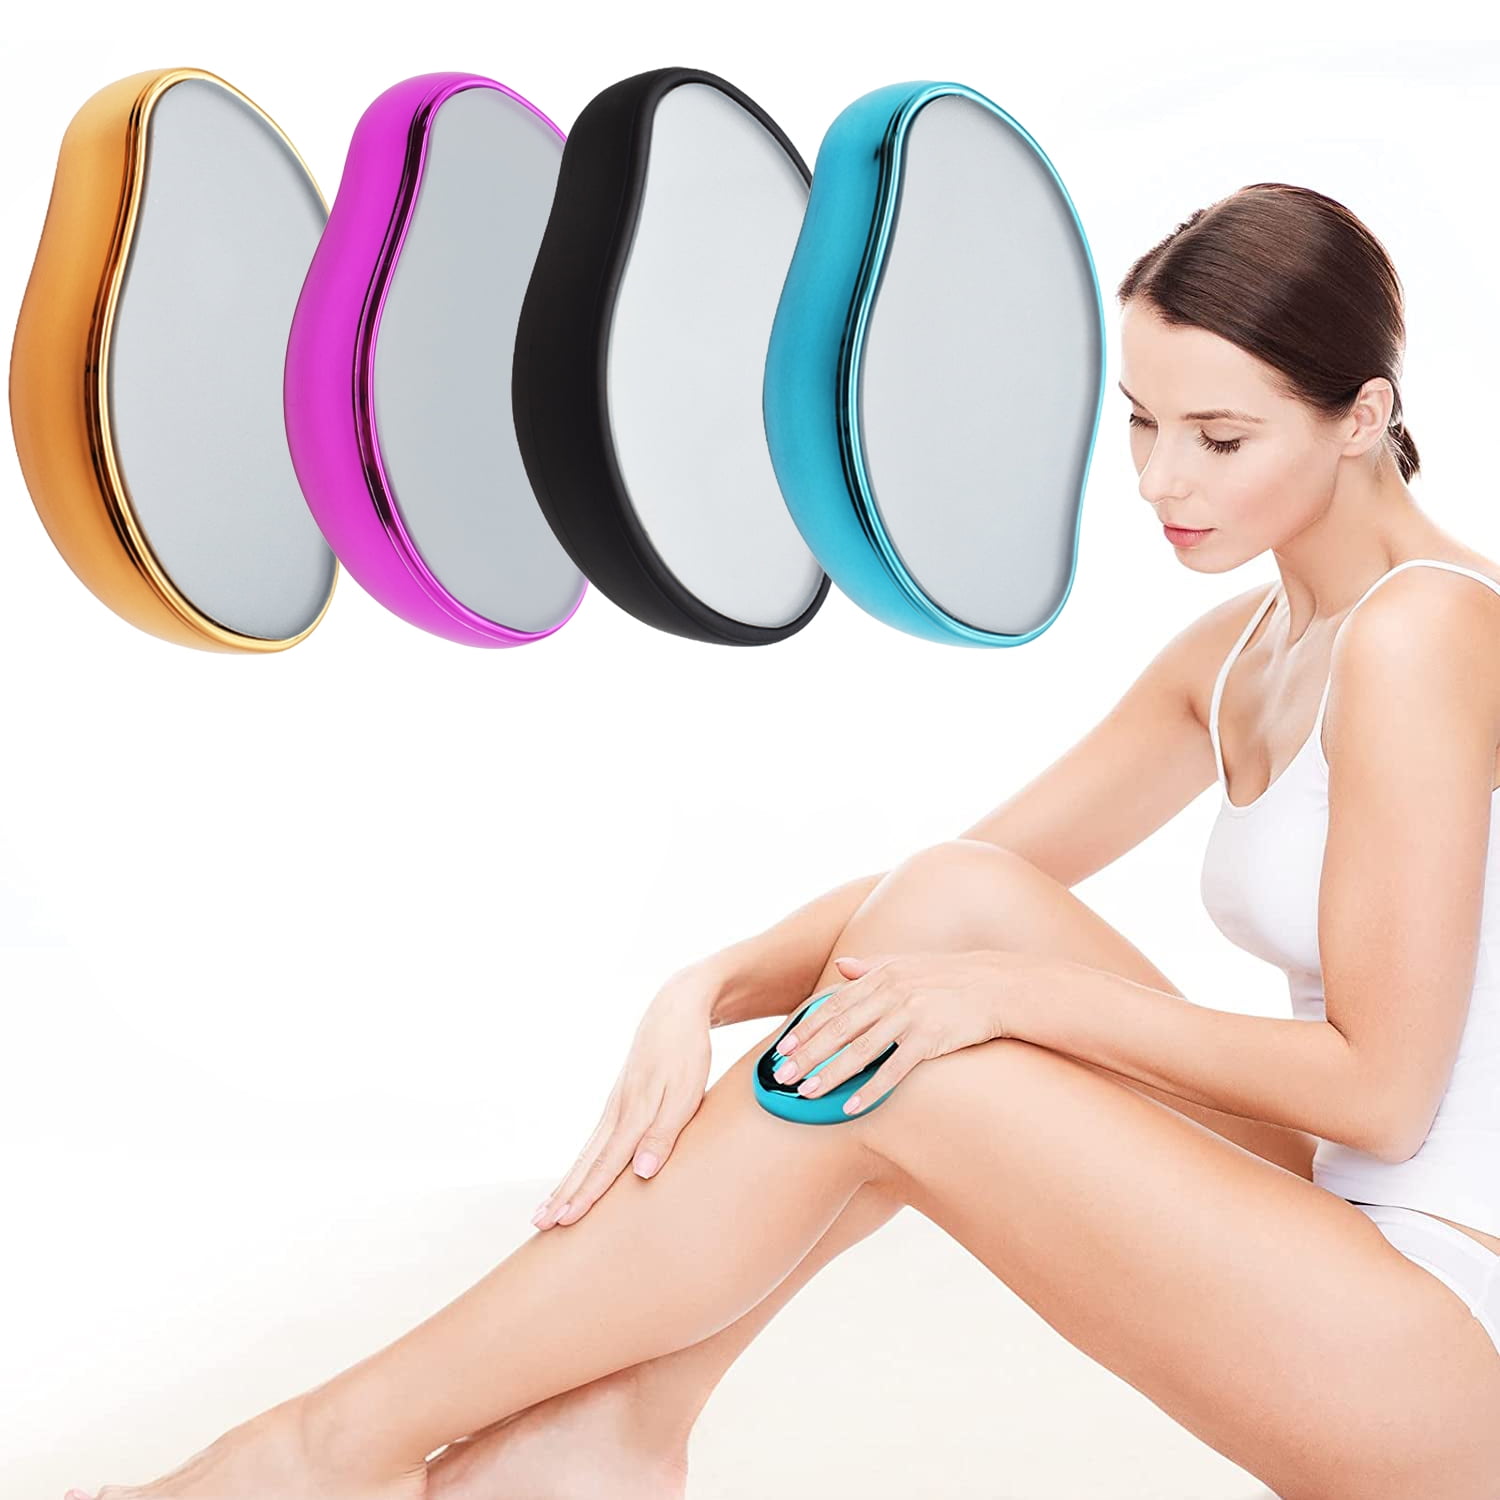 Foot File Ped Egg - Foot Care Tool - AliExpress